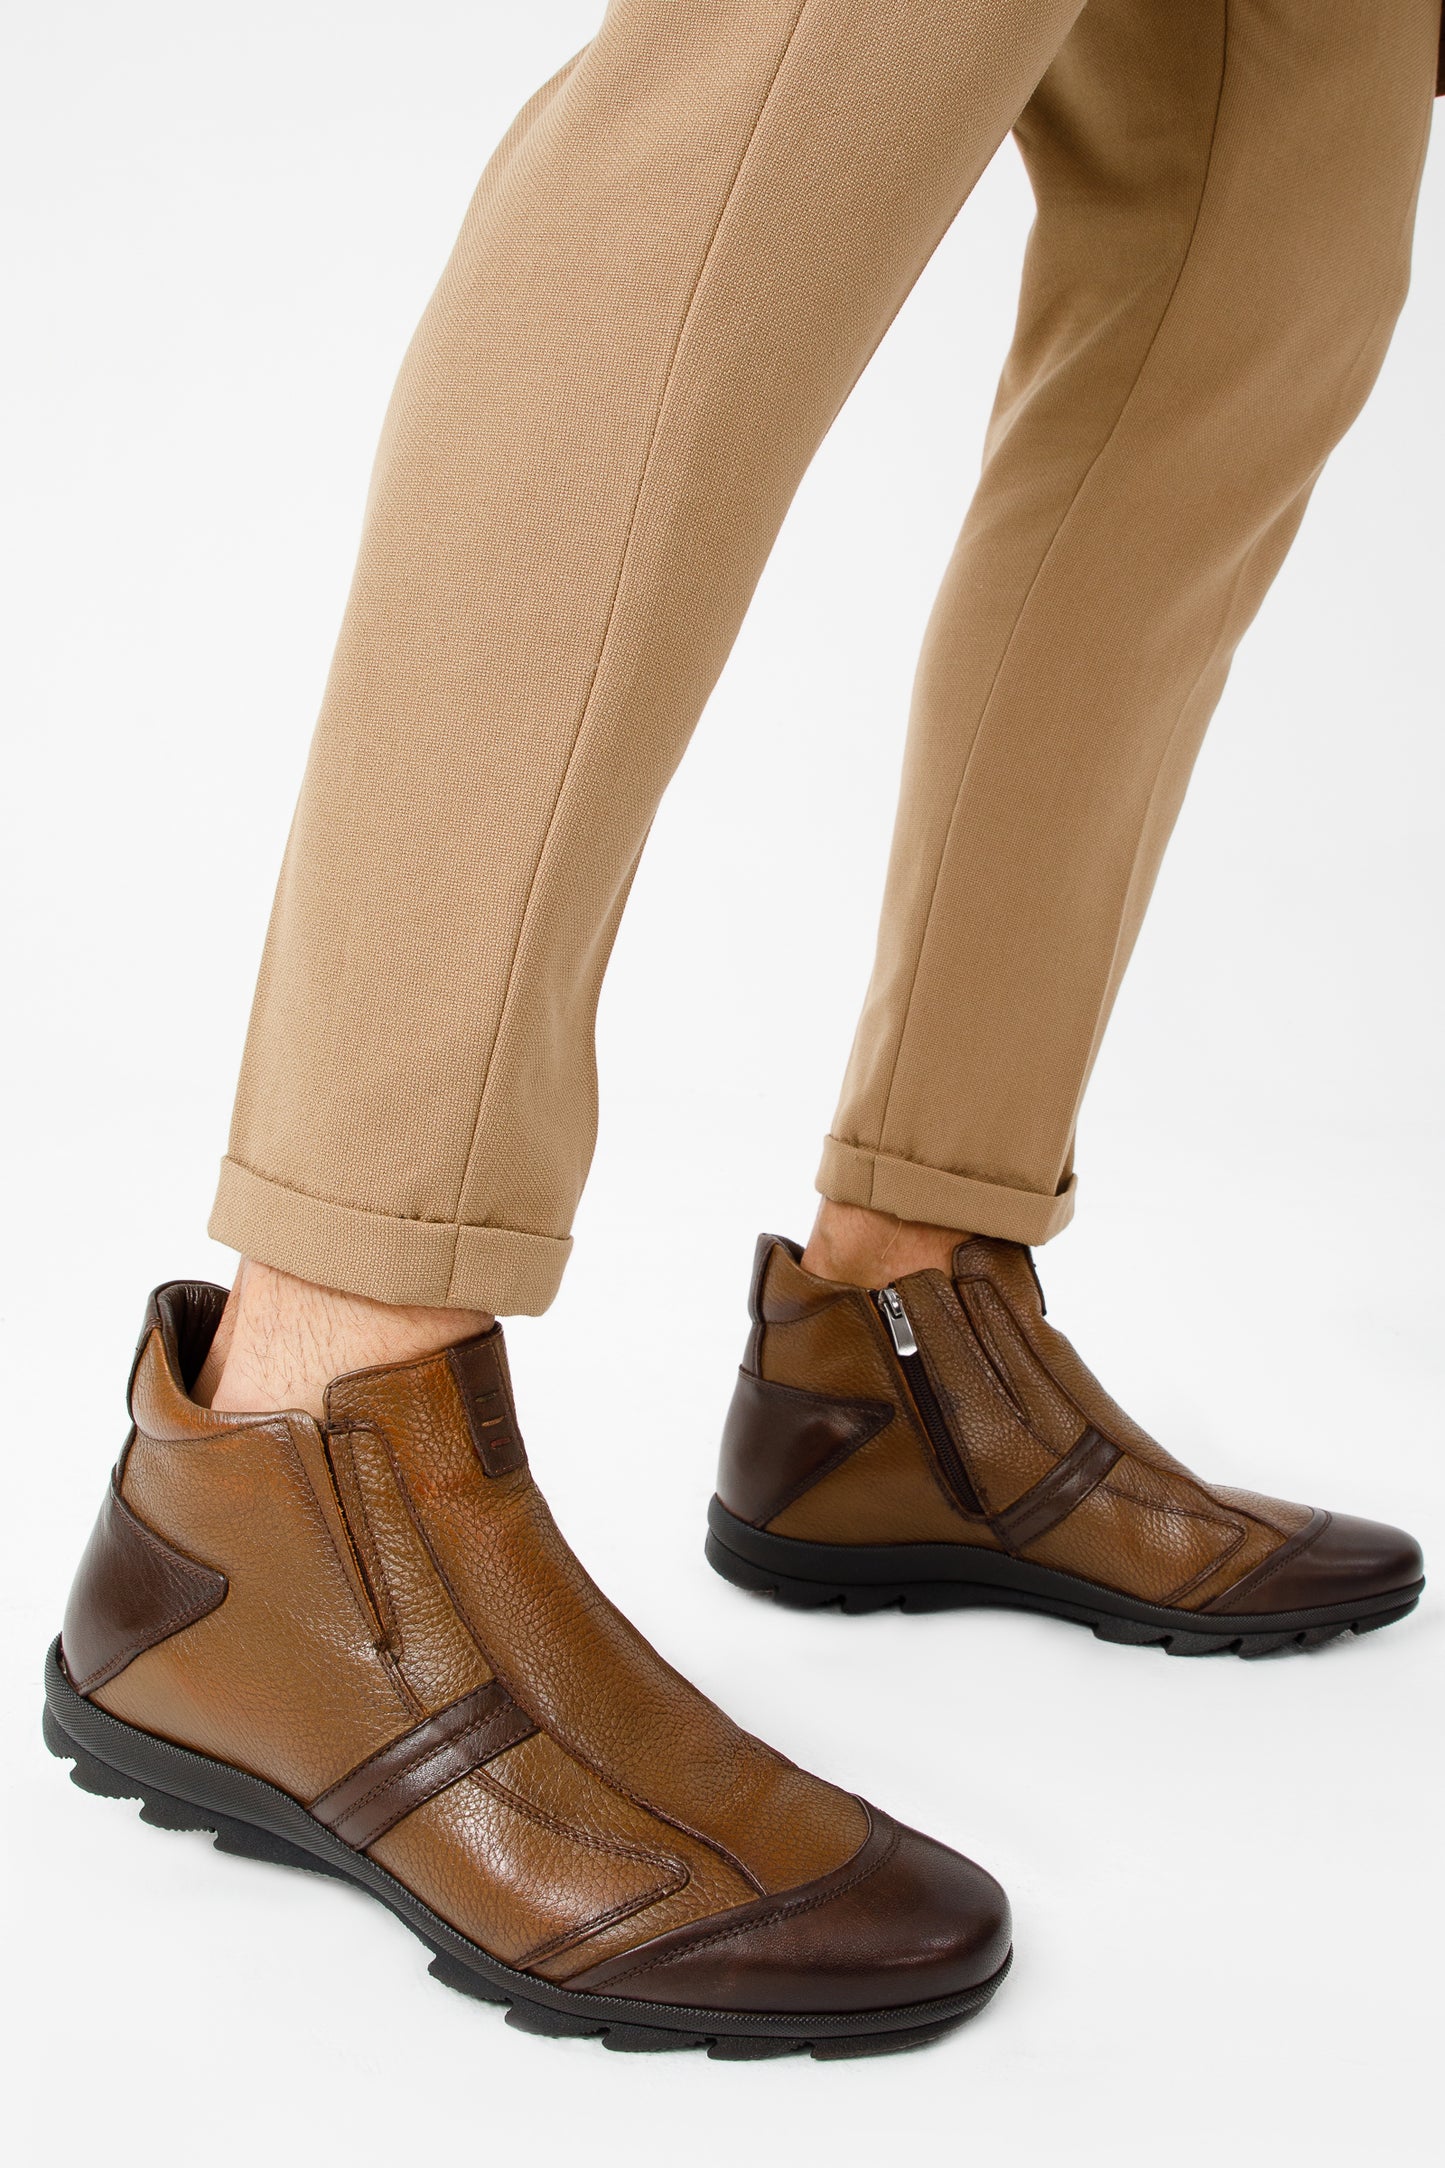 The Montreal Brown Leather Casual Zip-Up Ankle Men Boot